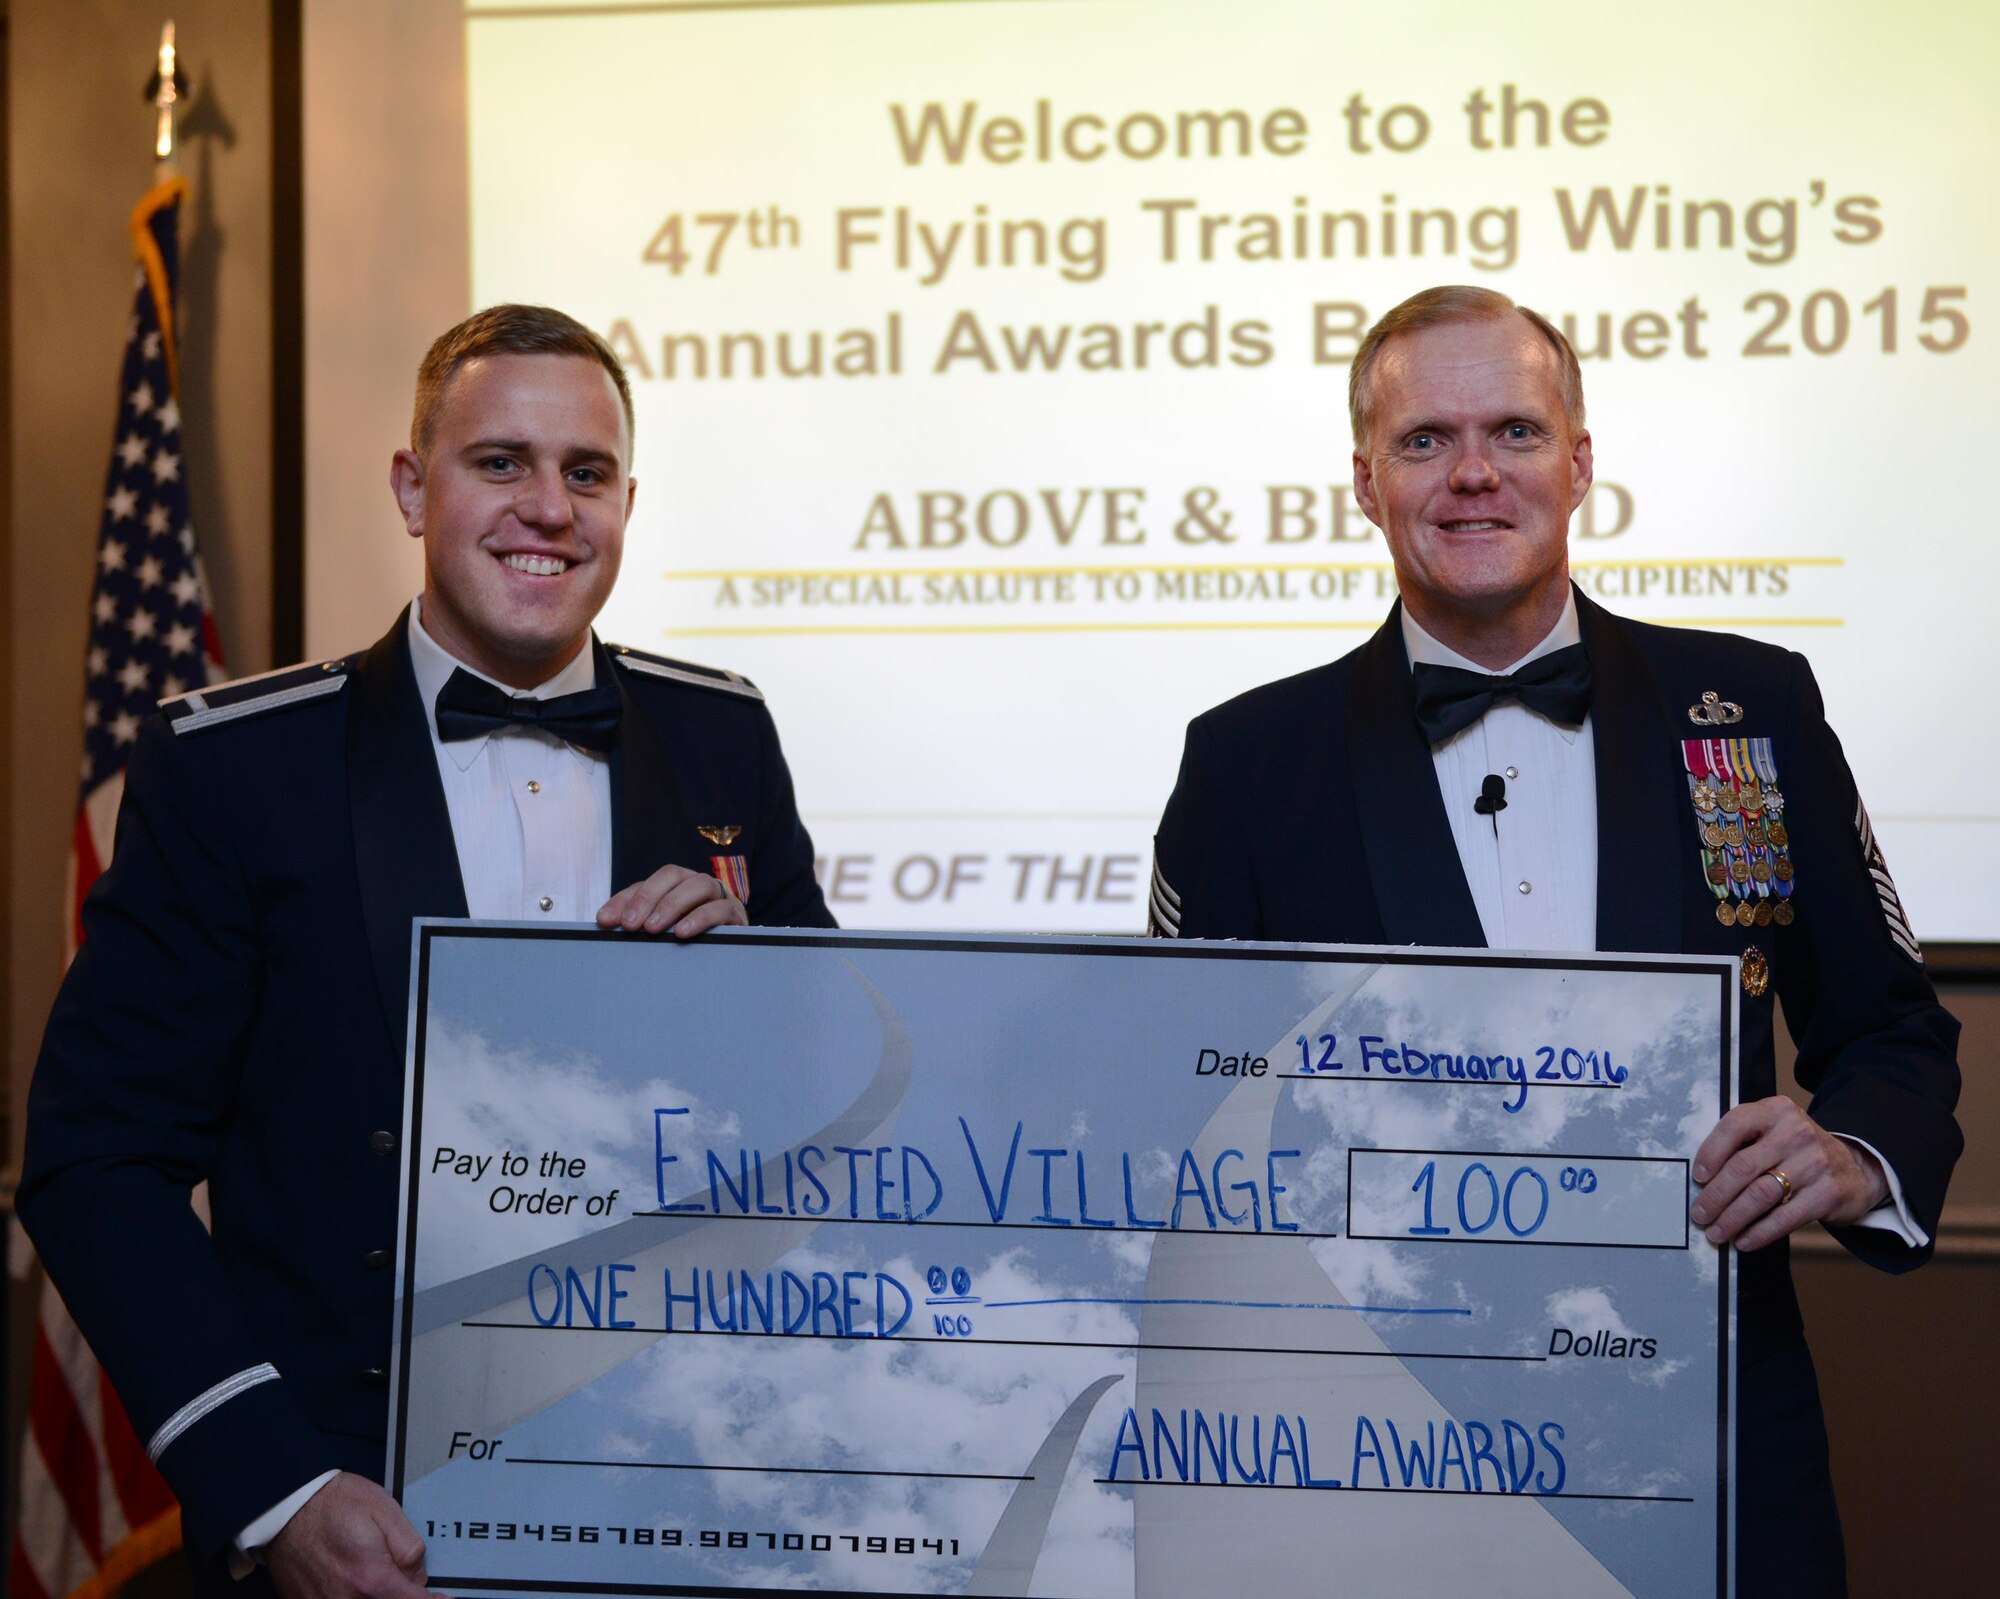 Chief Master Sgt. of the Air Force James Cody poses for a photo with 1st Lt. Matthew Elliot, 47th Student Squadron executive officer, at Laughlin Air Force Base, Texas, Feb. 12, 2016. Laughlin’s Annual Awards Banquet Committee donated $100 to the Enlisted Village on Cody’s behalf. (U.S. Air Force photo by Senior Airman Jimmie D. Pike) 